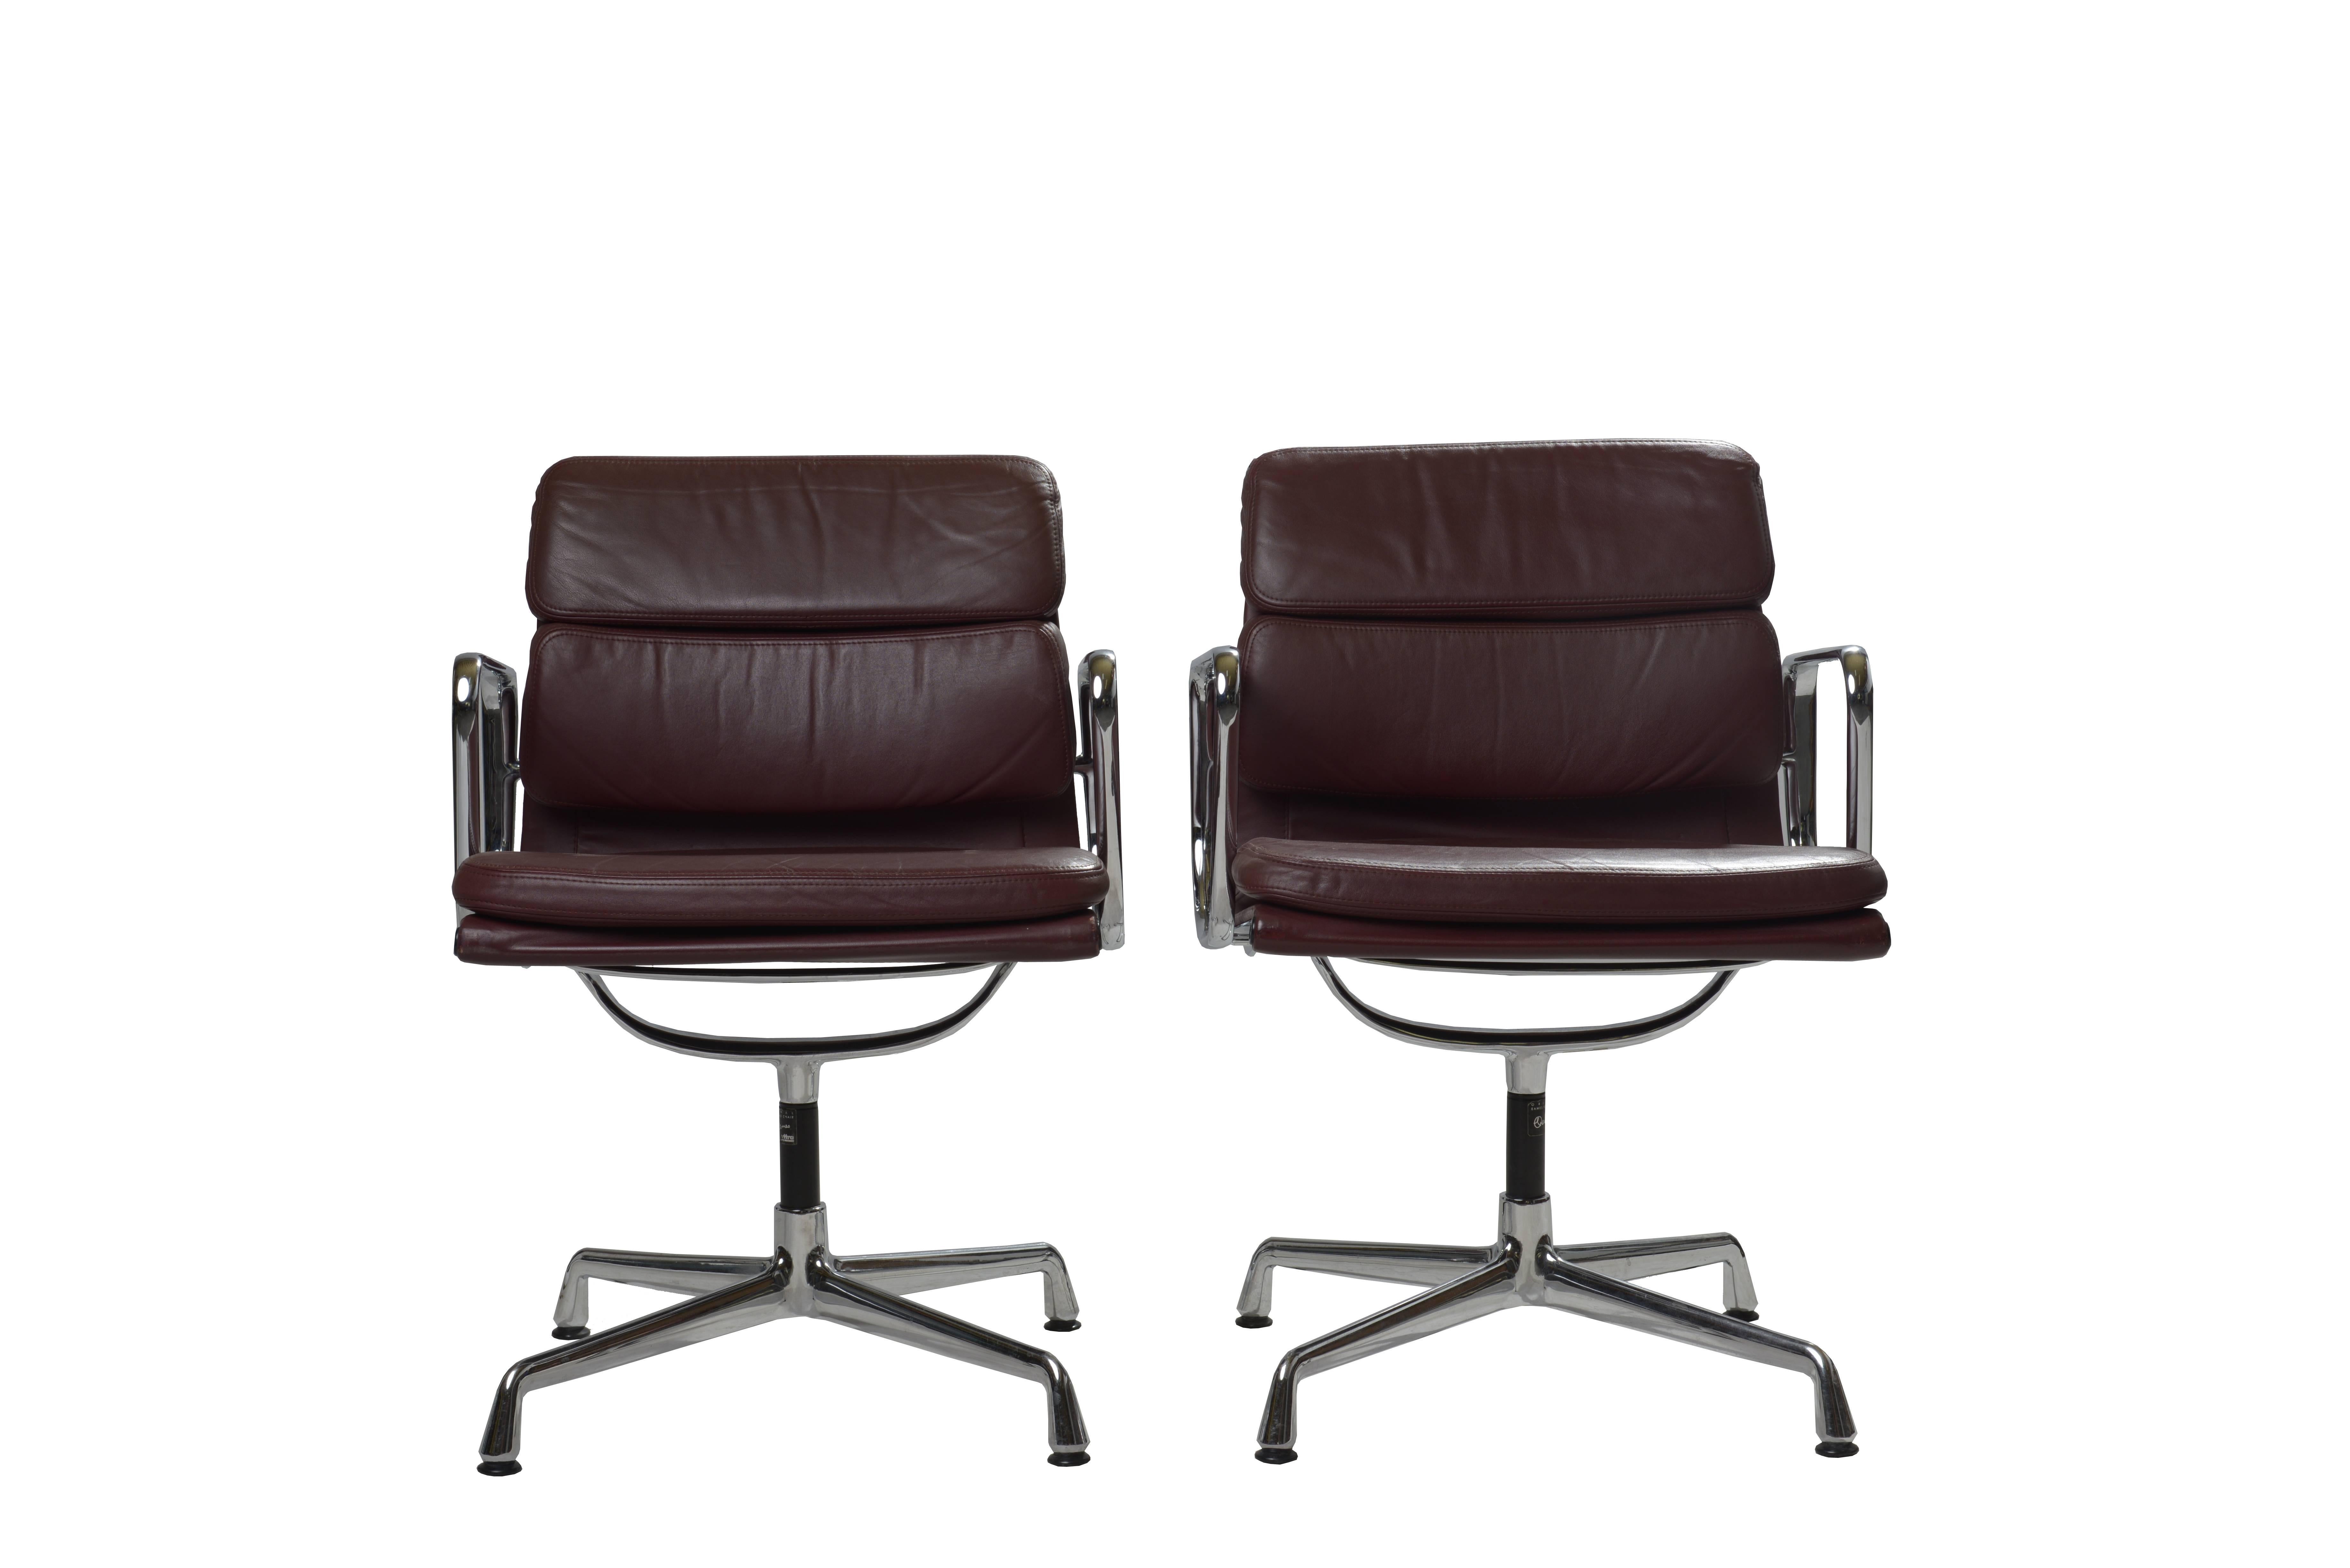 Pair of soft pad chairs model EA 208 designed by Charles and Ray Eames for Vitra, 1960s.

The seats are padded in their original soft burgundy leather, on a cast aluminum frame with plated chrome and a four-star base. Marked with label and stamped